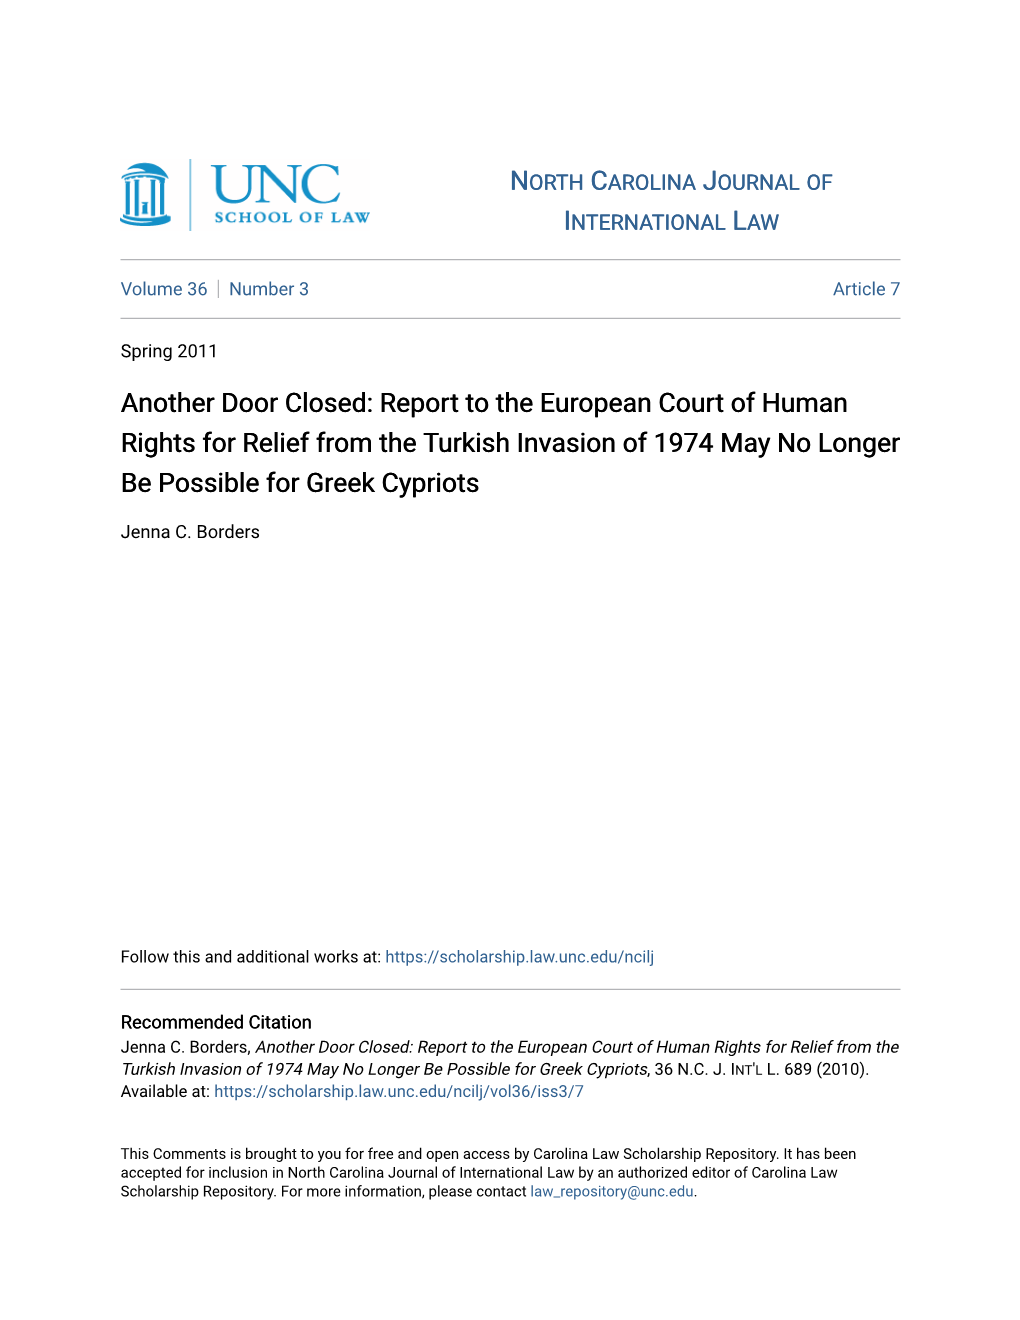 Another Door Closed: Report to the European Court of Human Rights for Relief from the Turkish Invasion of 1974 May No Longer Be Possible for Greek Cypriots